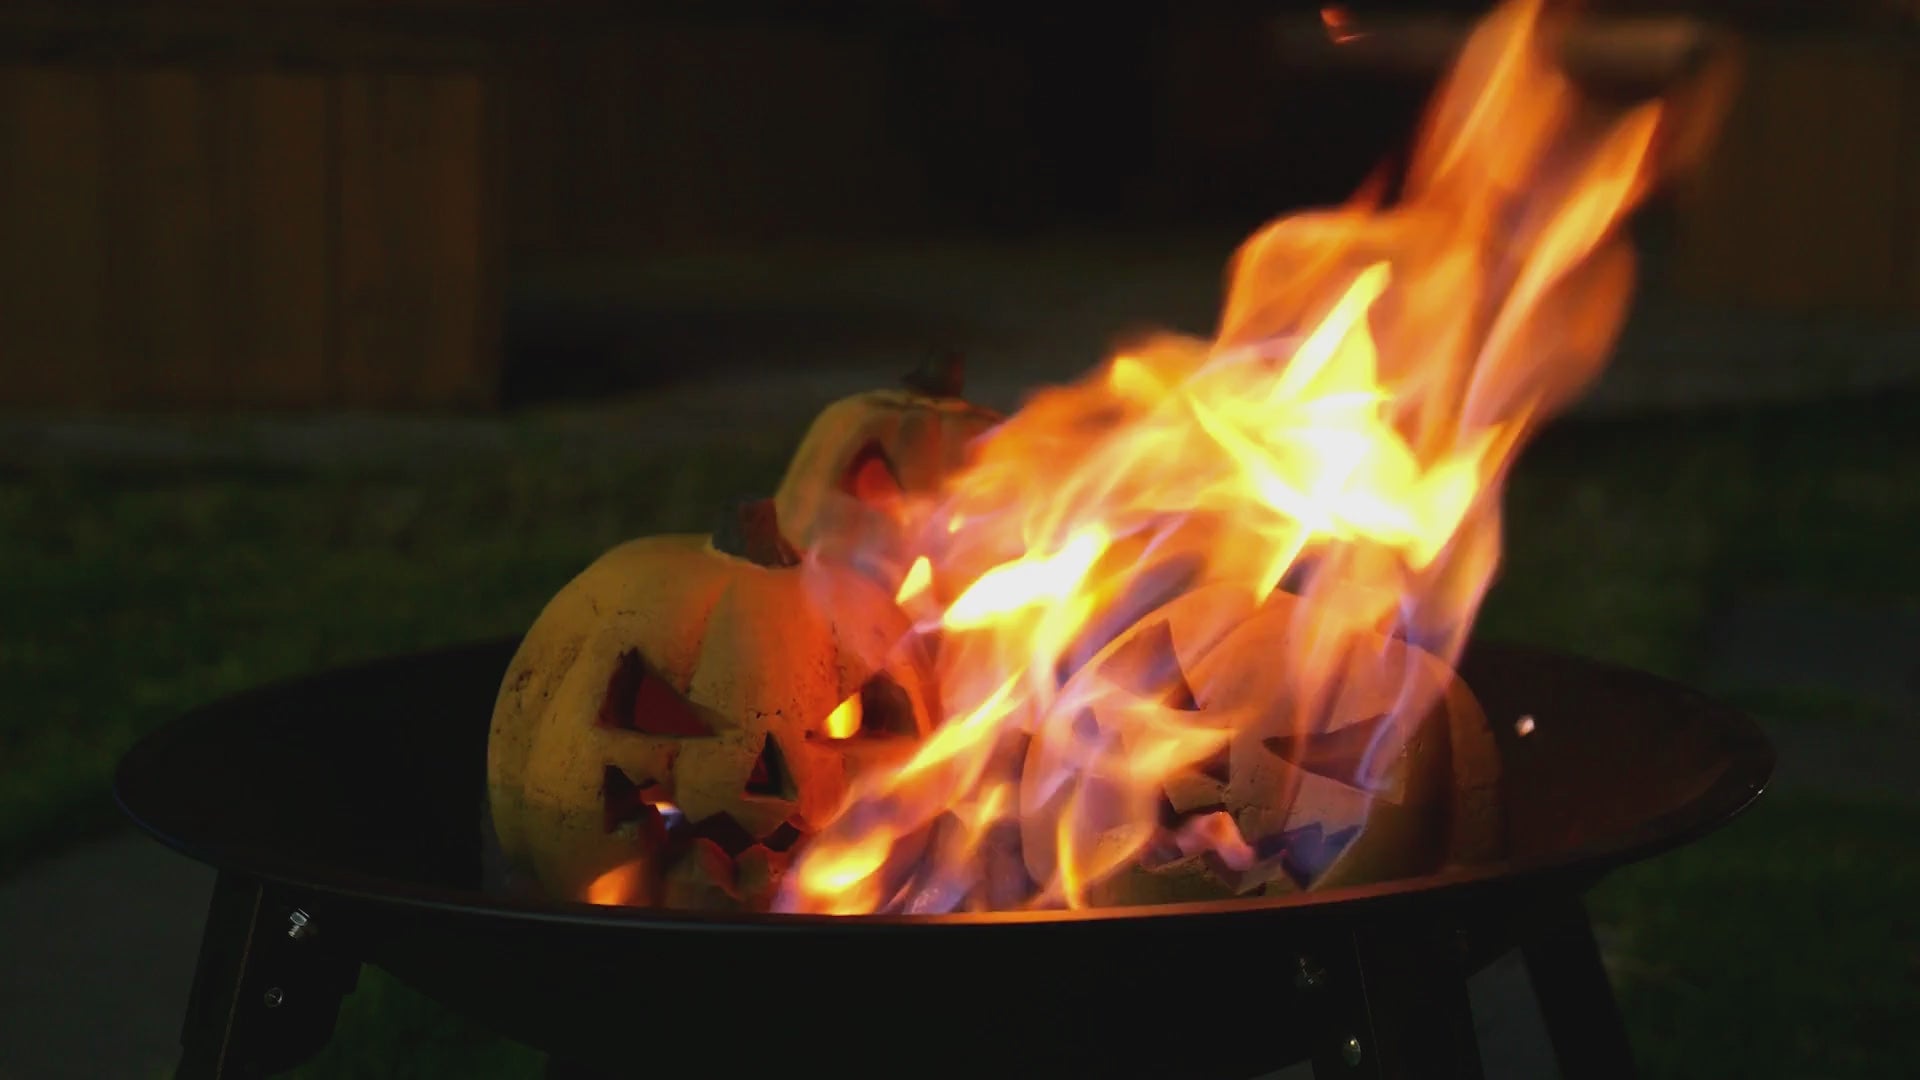 Load video: there is taller shorter pumpkin logs in outdoor fire pit